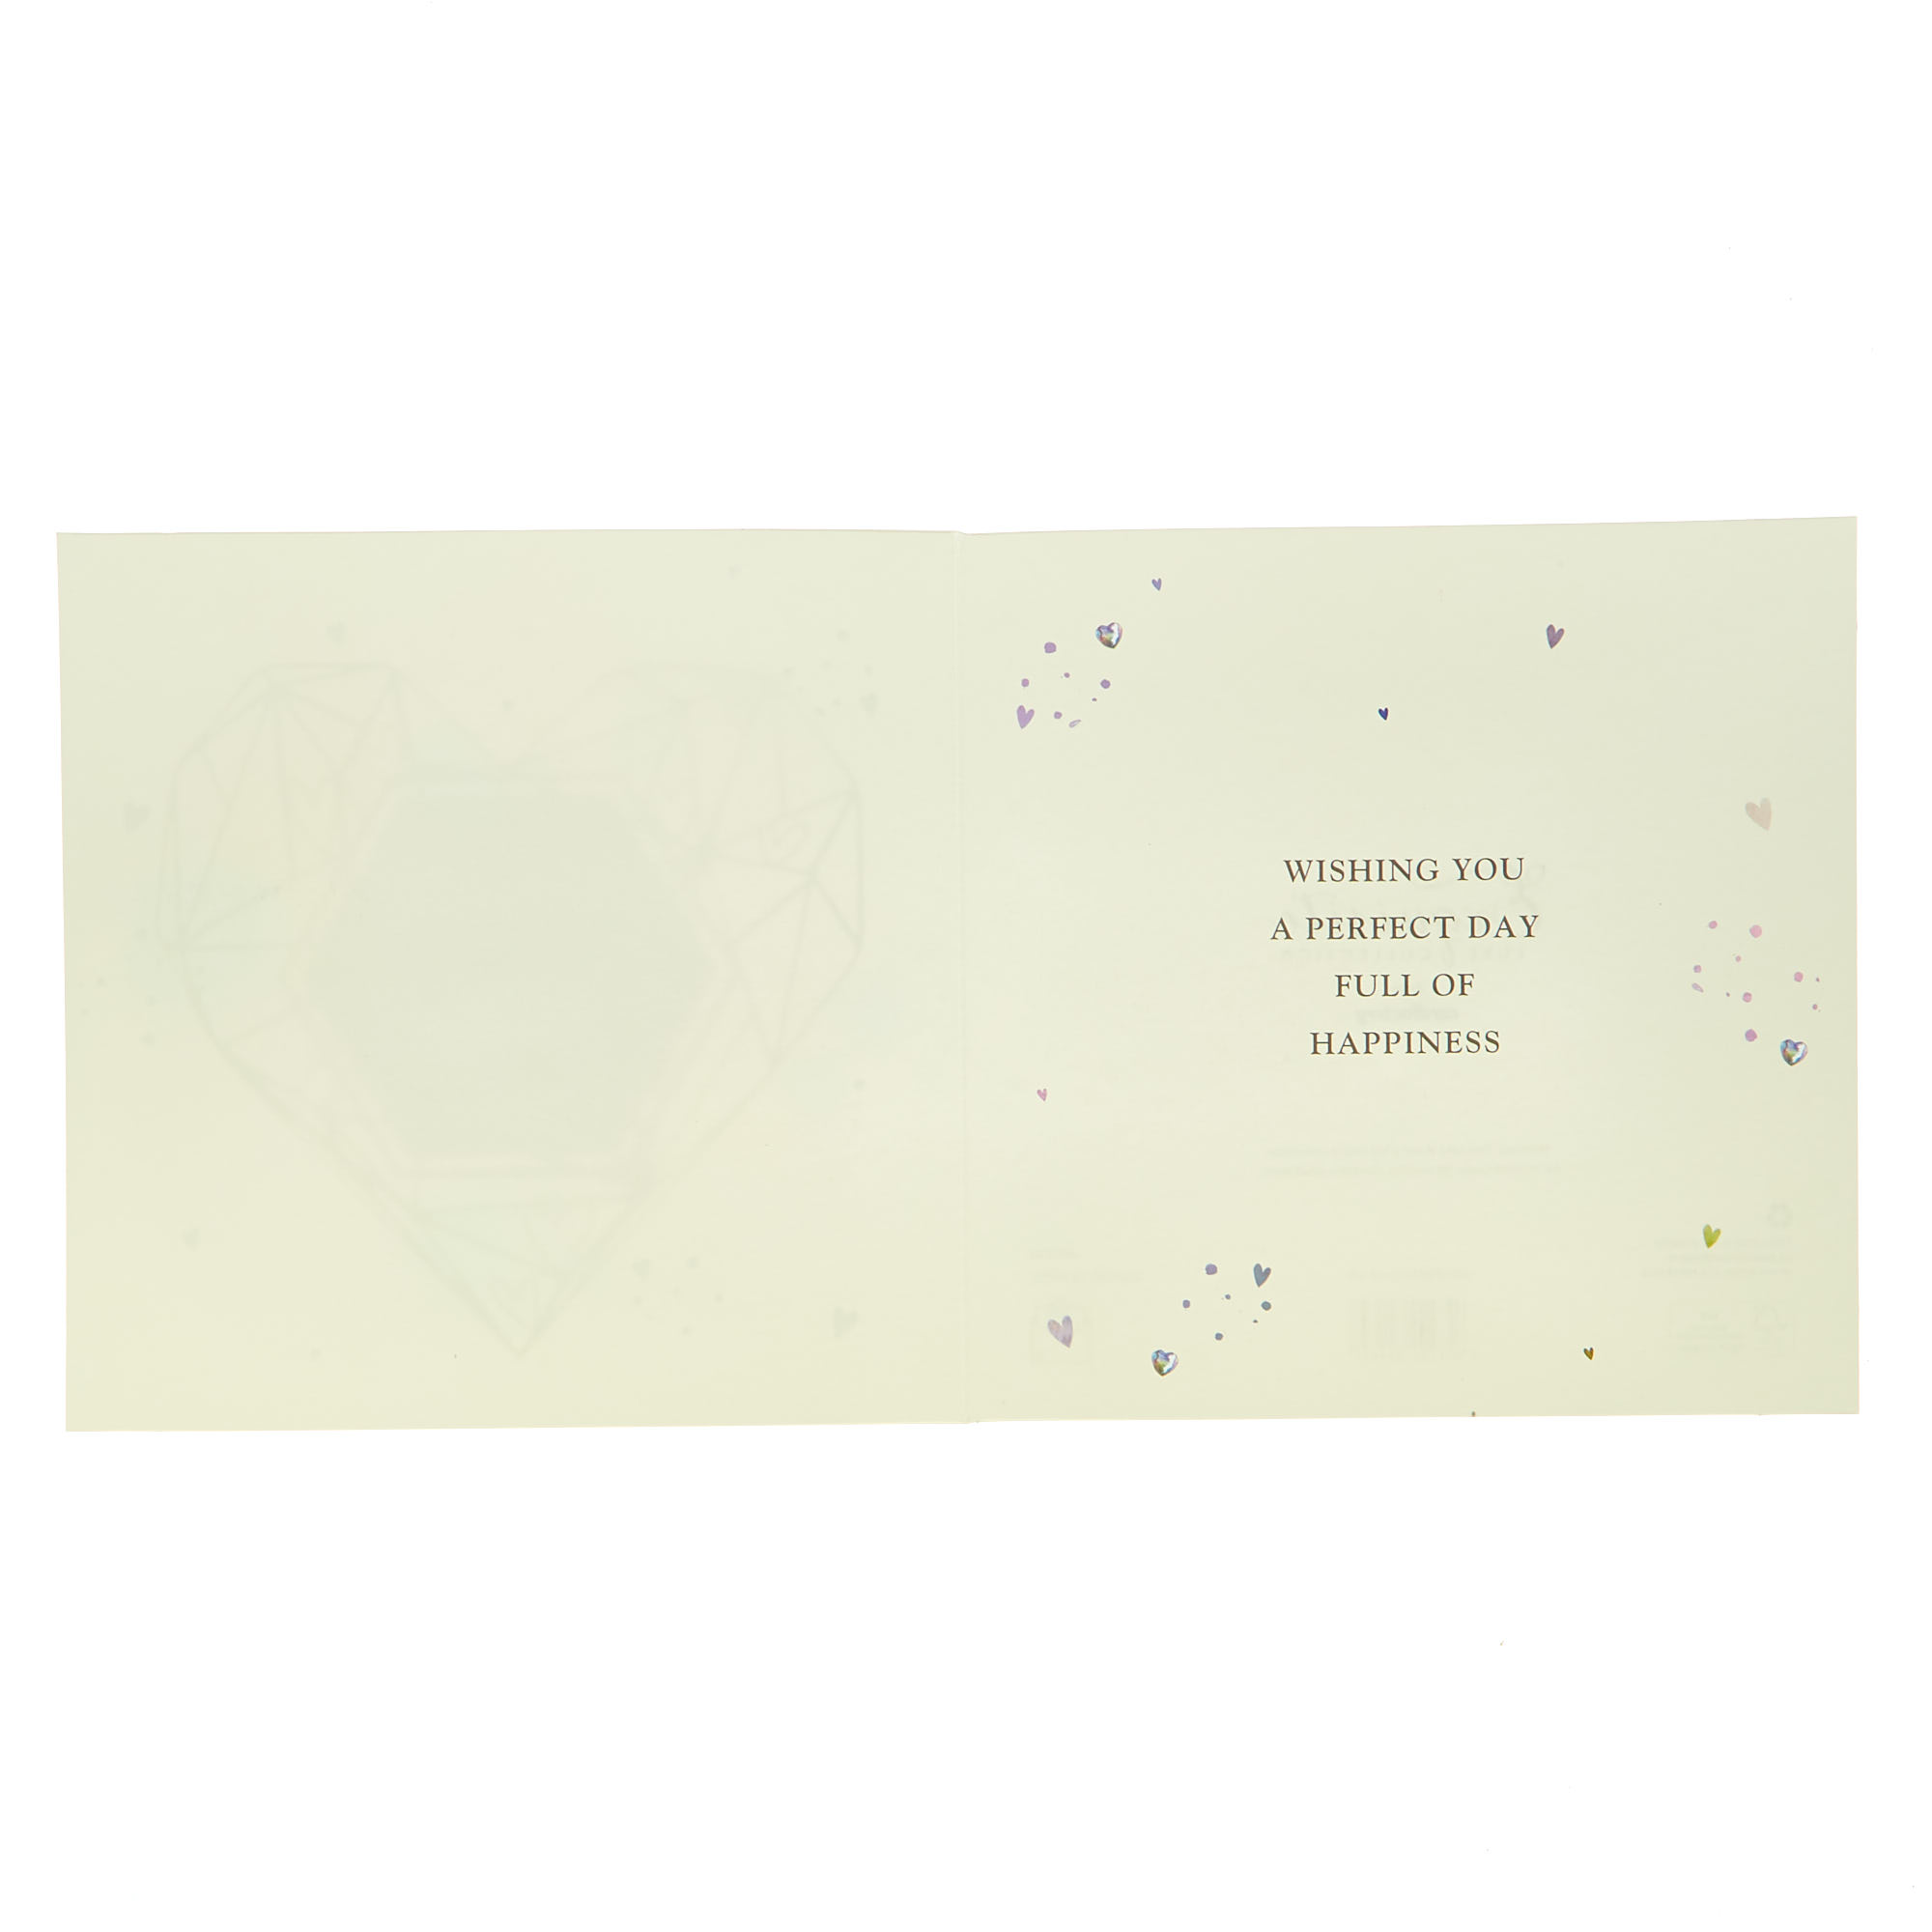 Exquisite Collection Wedding Card - Geo Heart